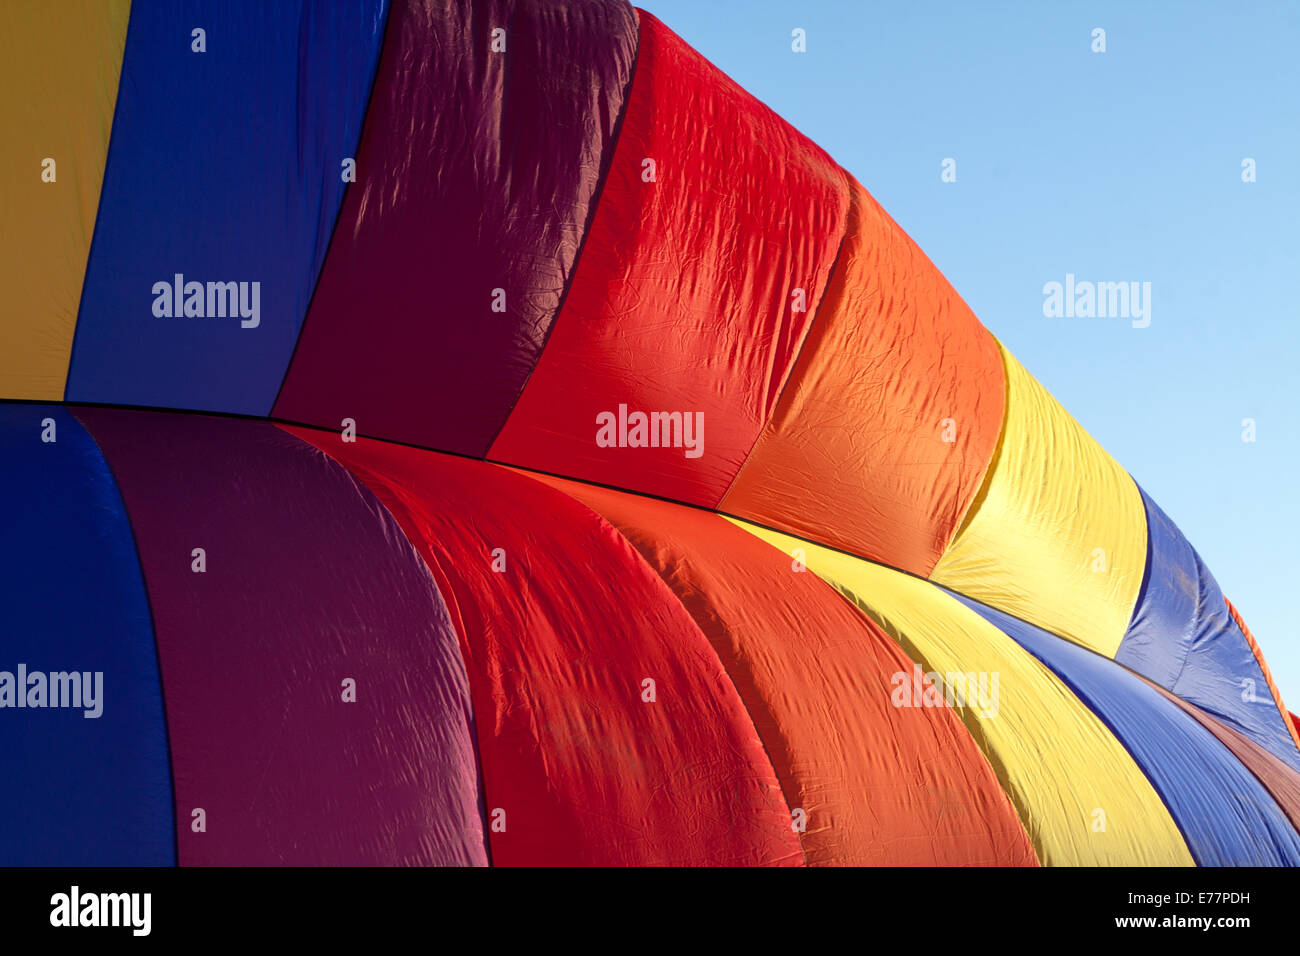 Detail of a hot-air balloon being inflated in early morning light Stock Photo